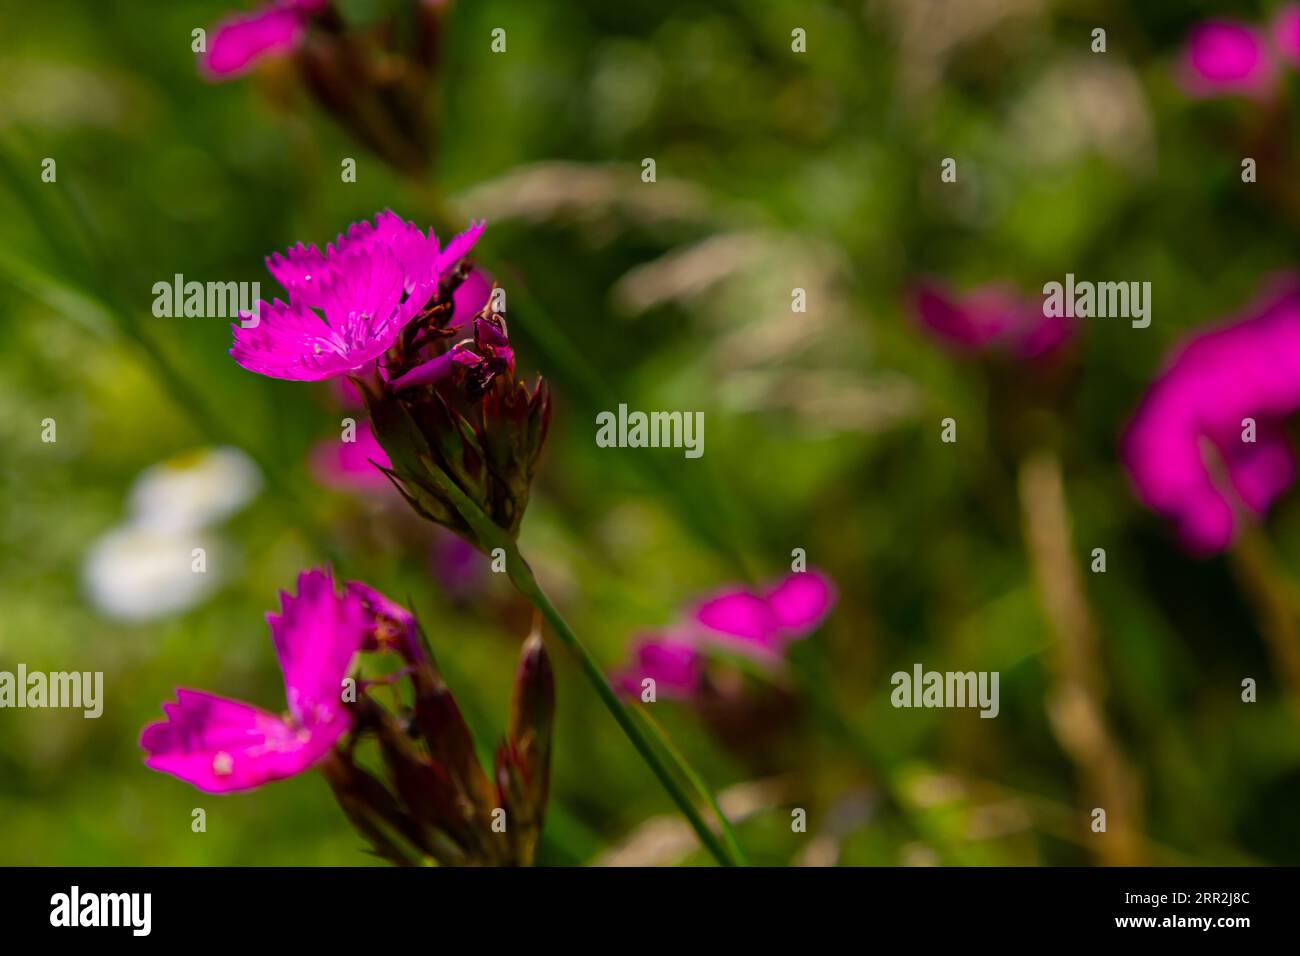 Close up small pink wildflower blossoms and stem, specifically Deptford Pink Dianthus armeria, with a meadow out of focus in the background. Stock Photo